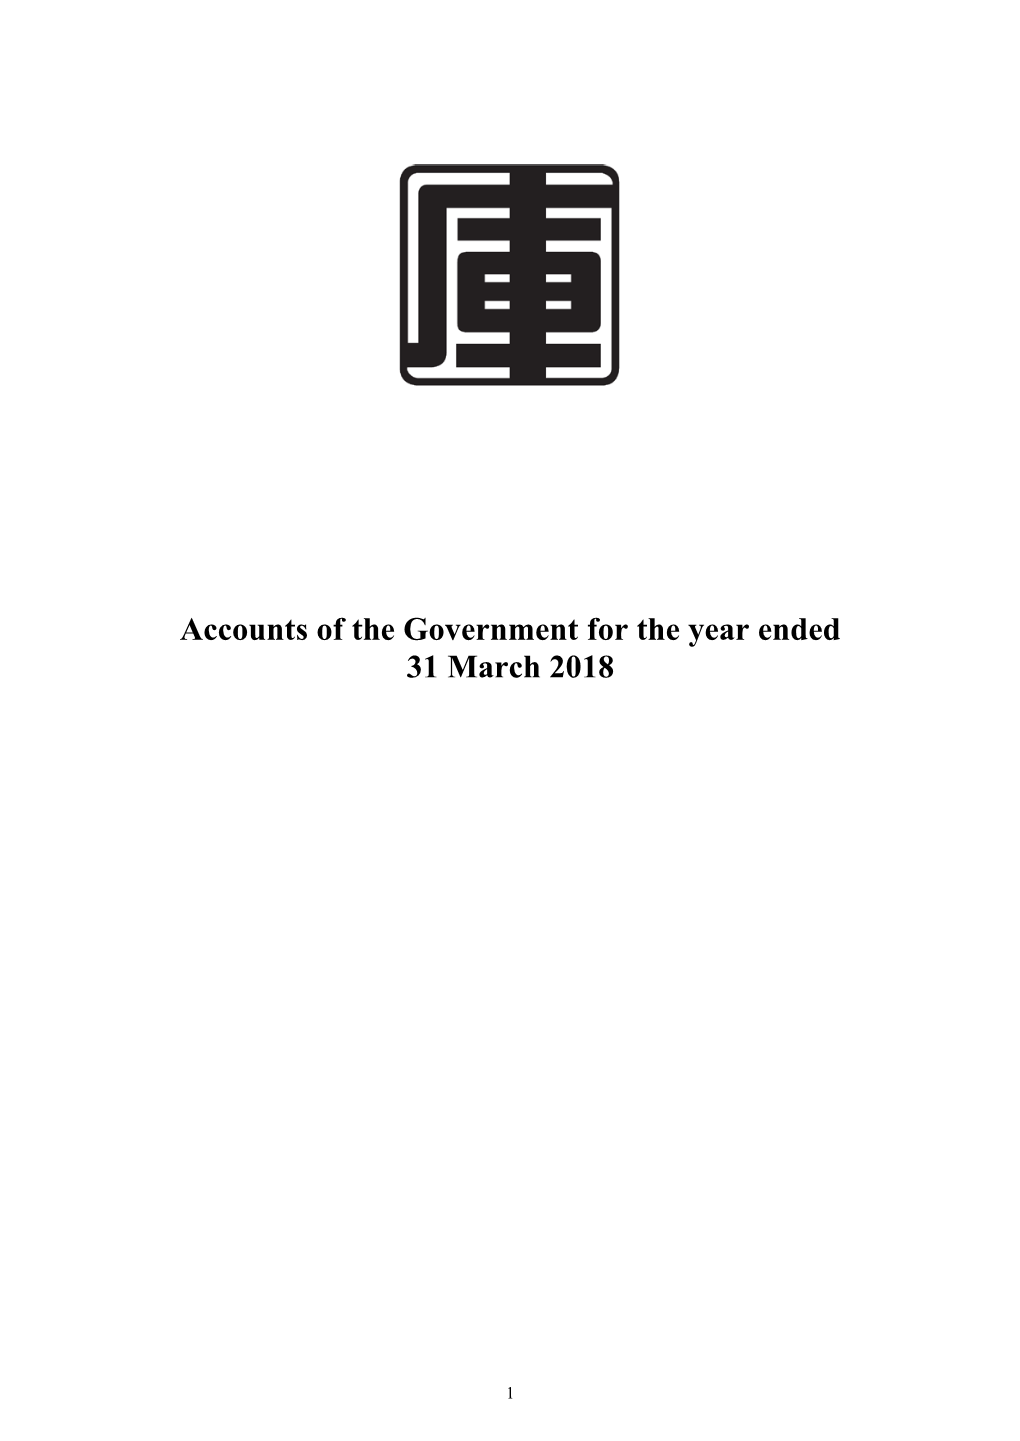 Accounts of the Government for the Year Ended 31 March 2018